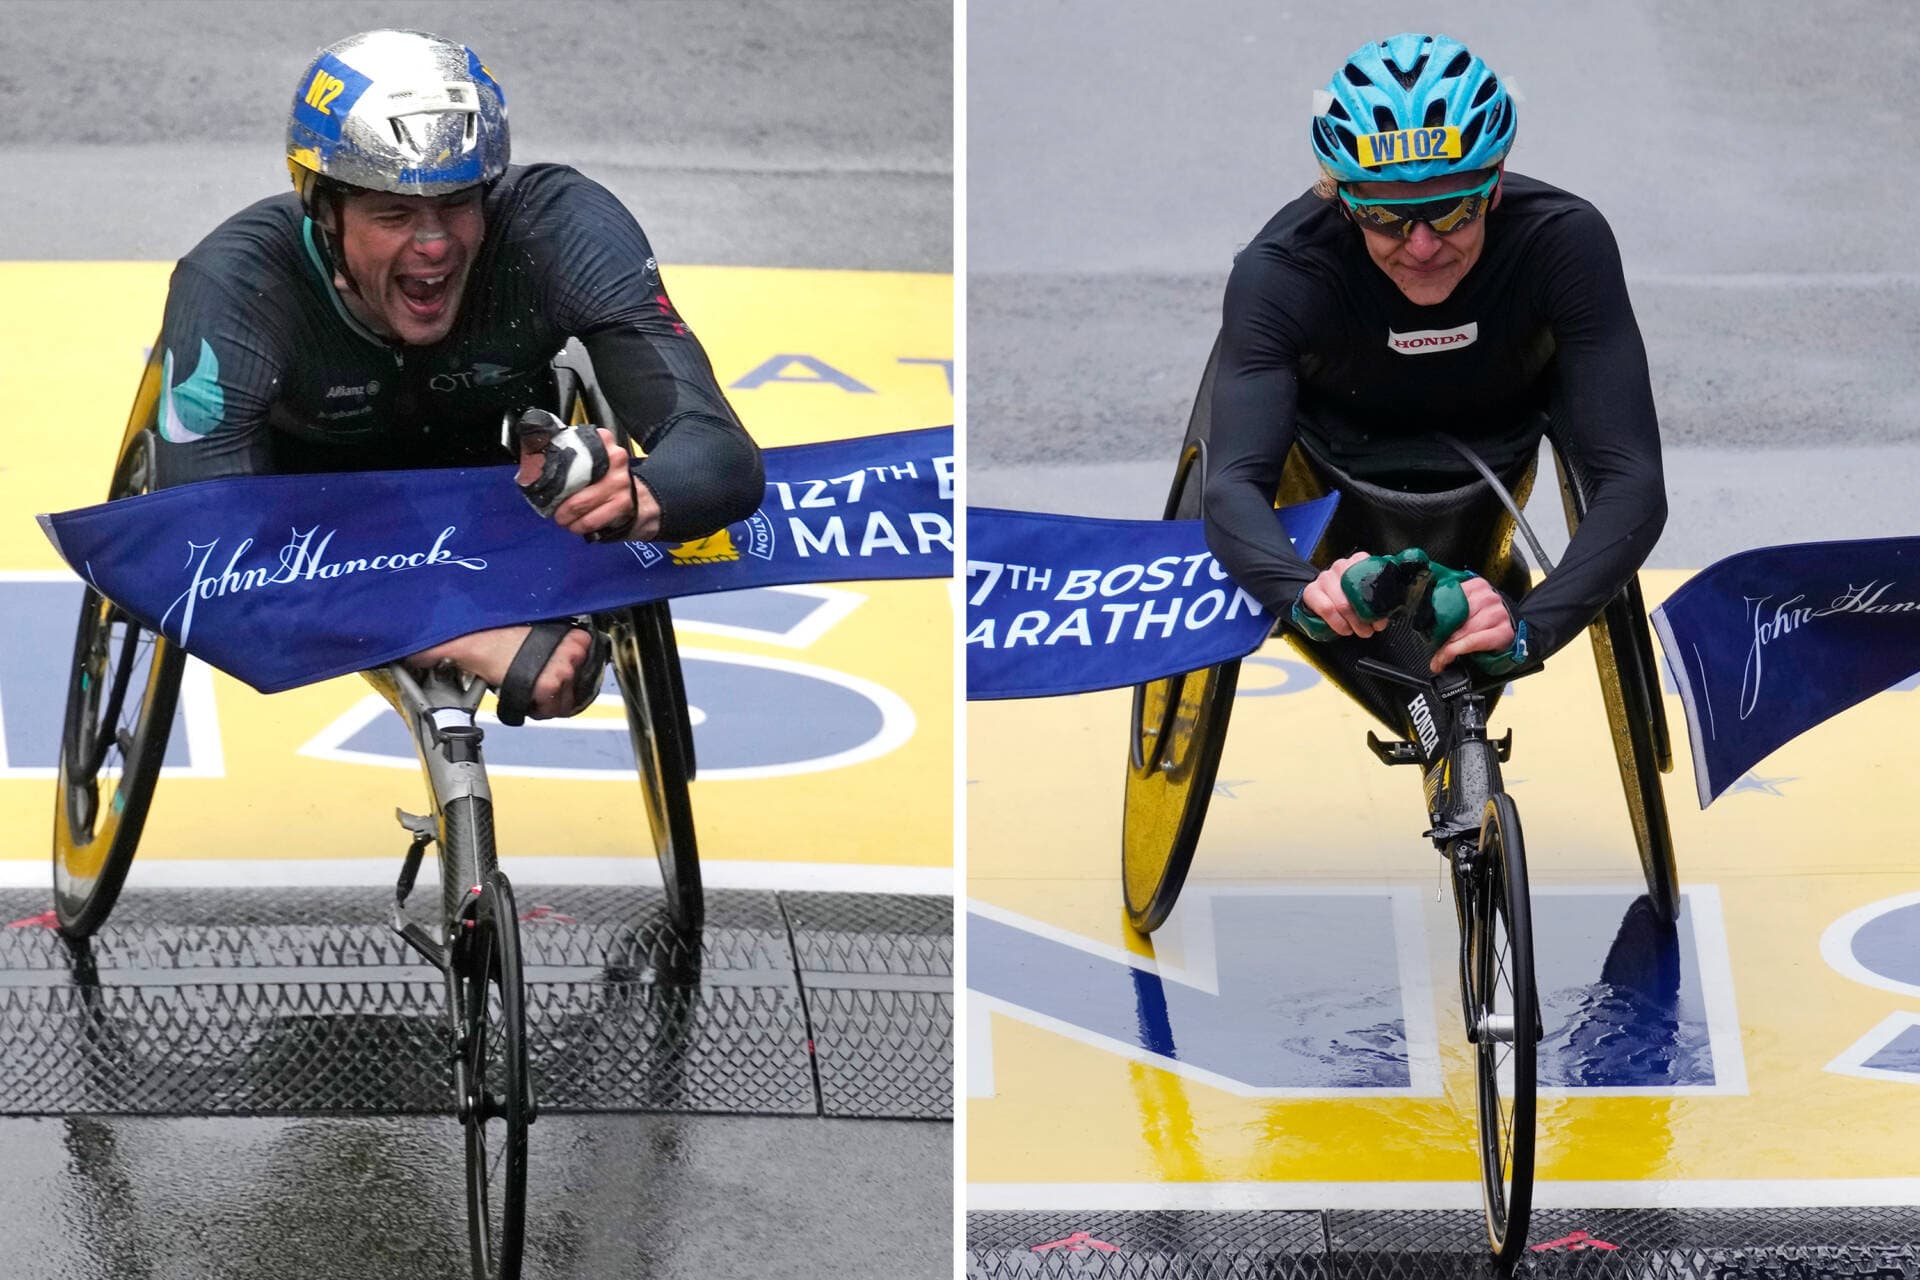 A composite image of Marcel Hug, left, and Susannah Scaroni crossing the finish line in the 127th Boston Marathon. (Charles Krupa/AP)